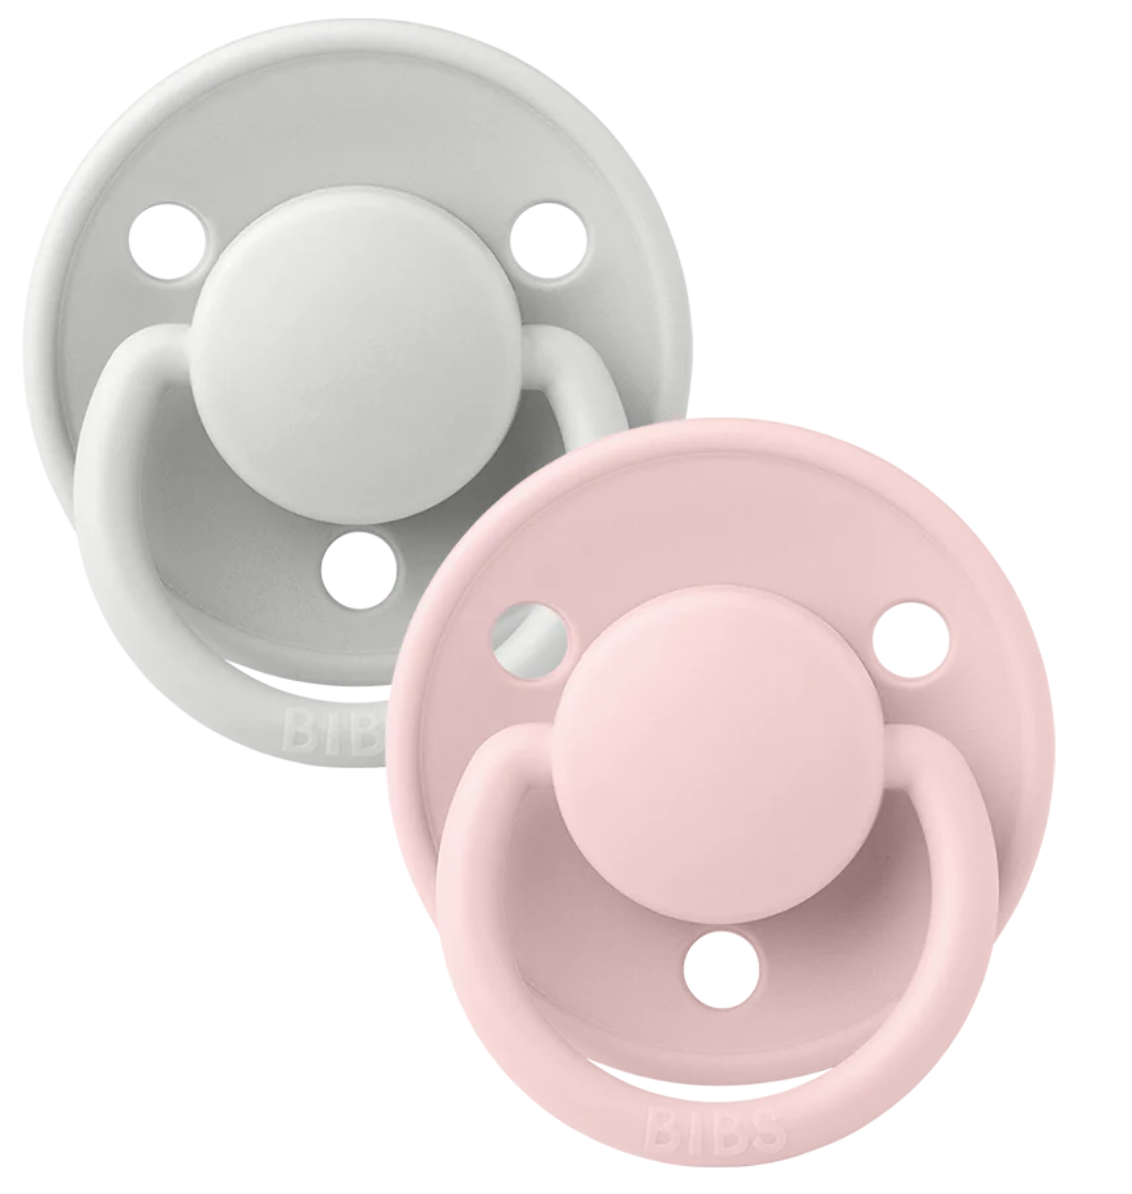 BIBS Pacifiers De Lux Silicone 2 Pack: Haze/Blossom